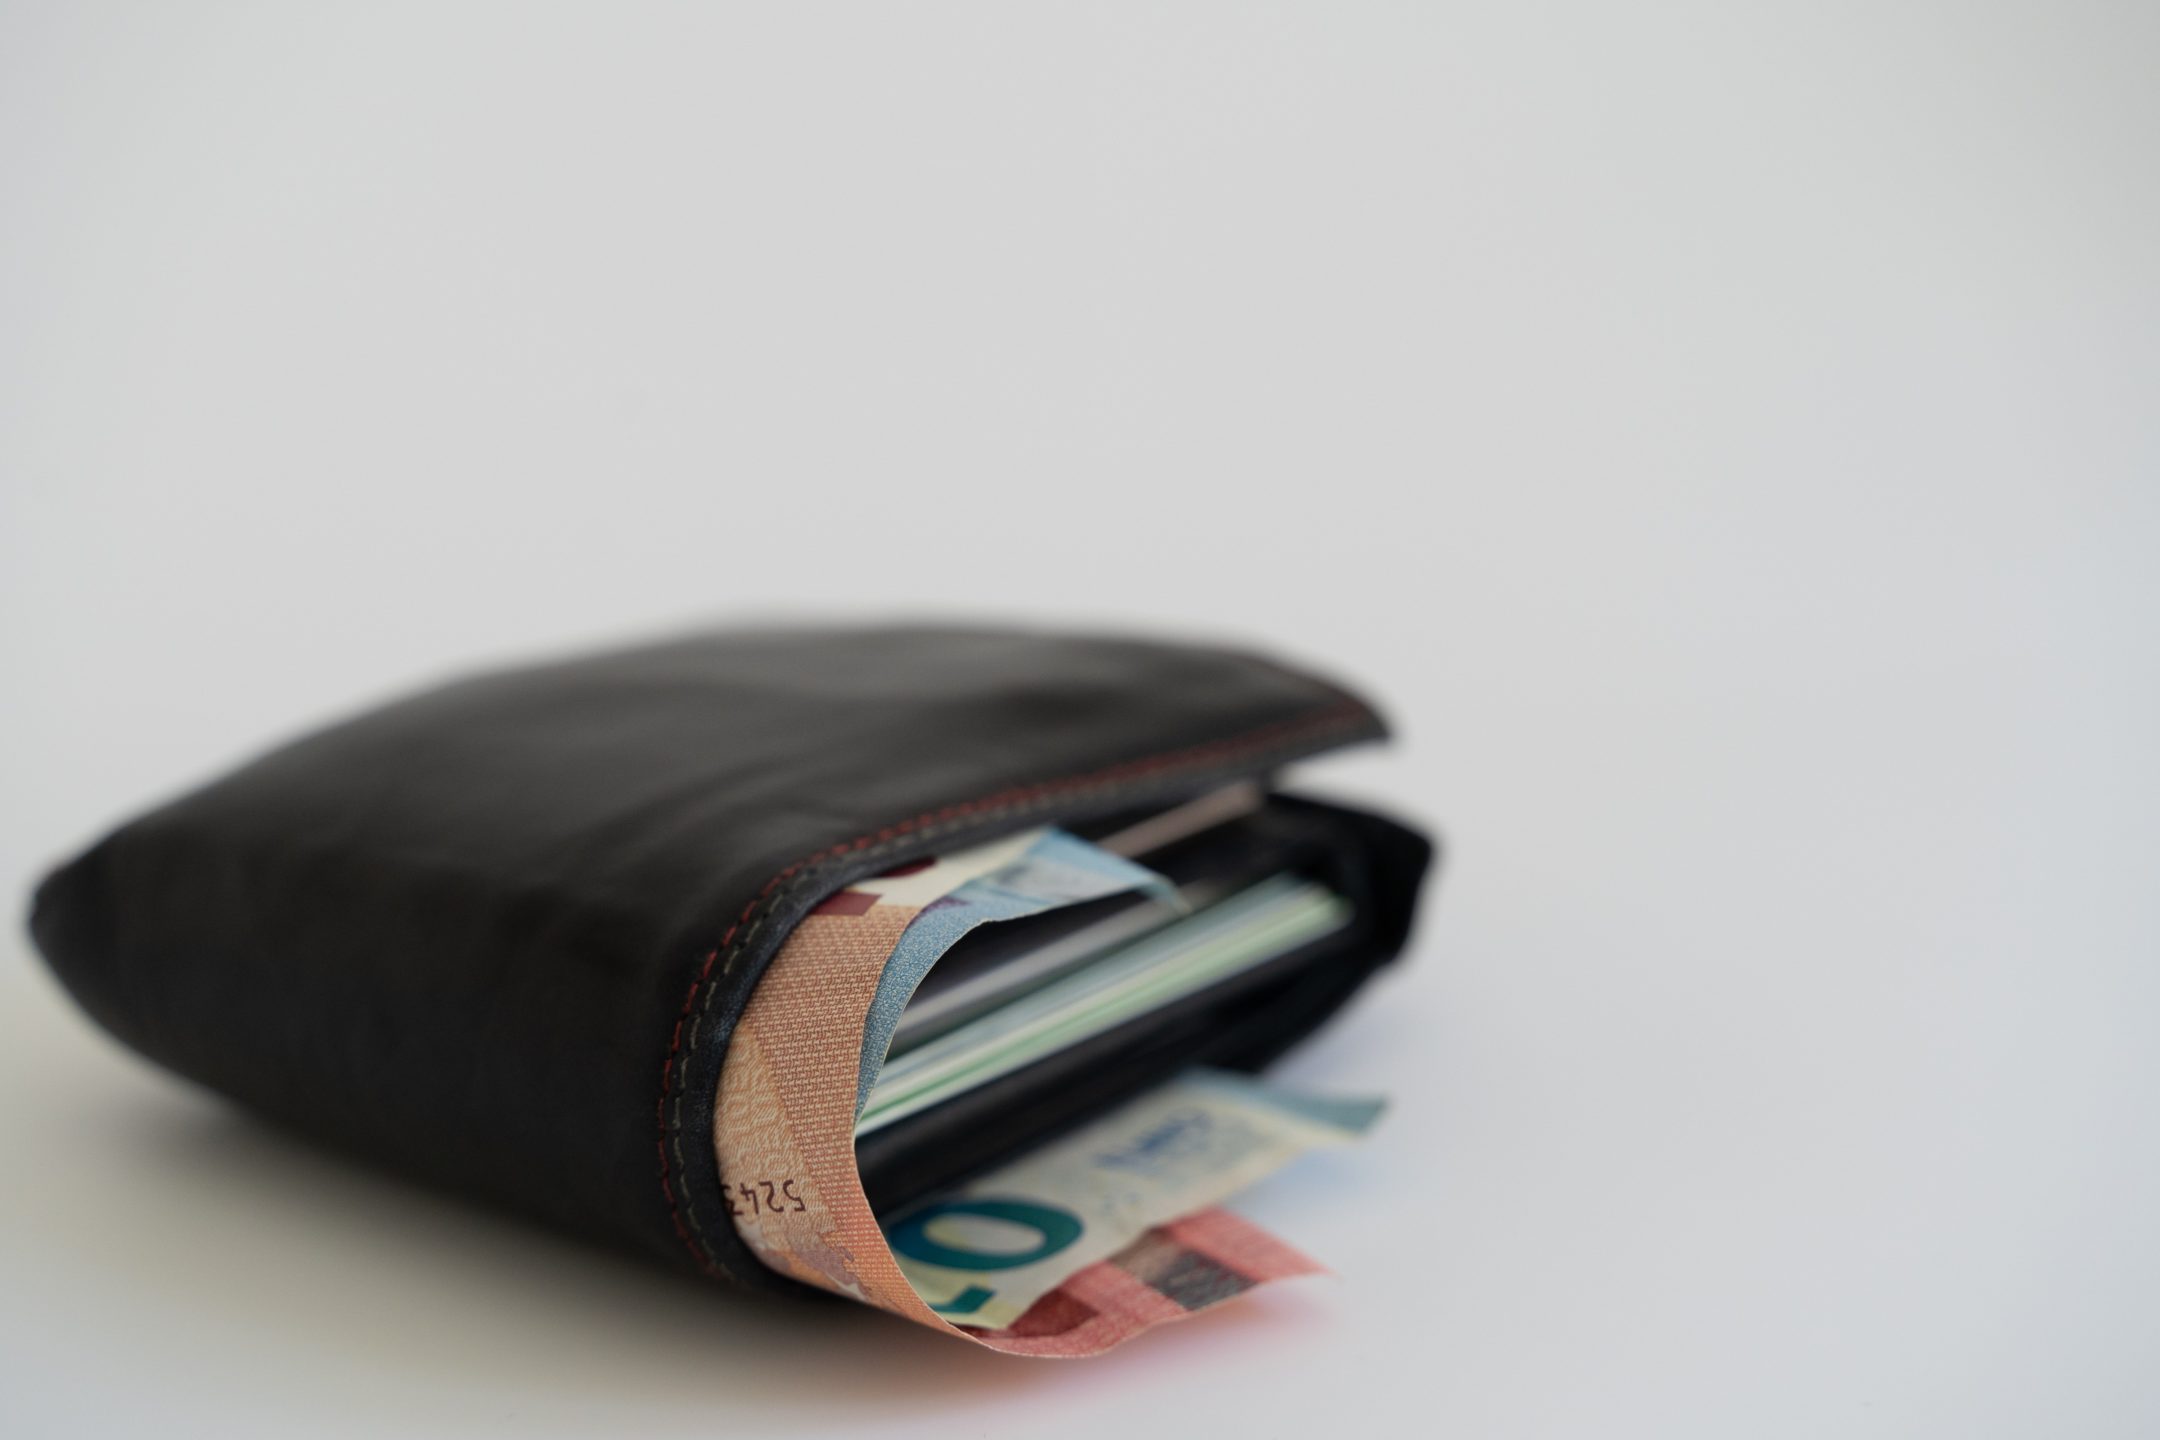 Wallet with money representing a change in spousal support